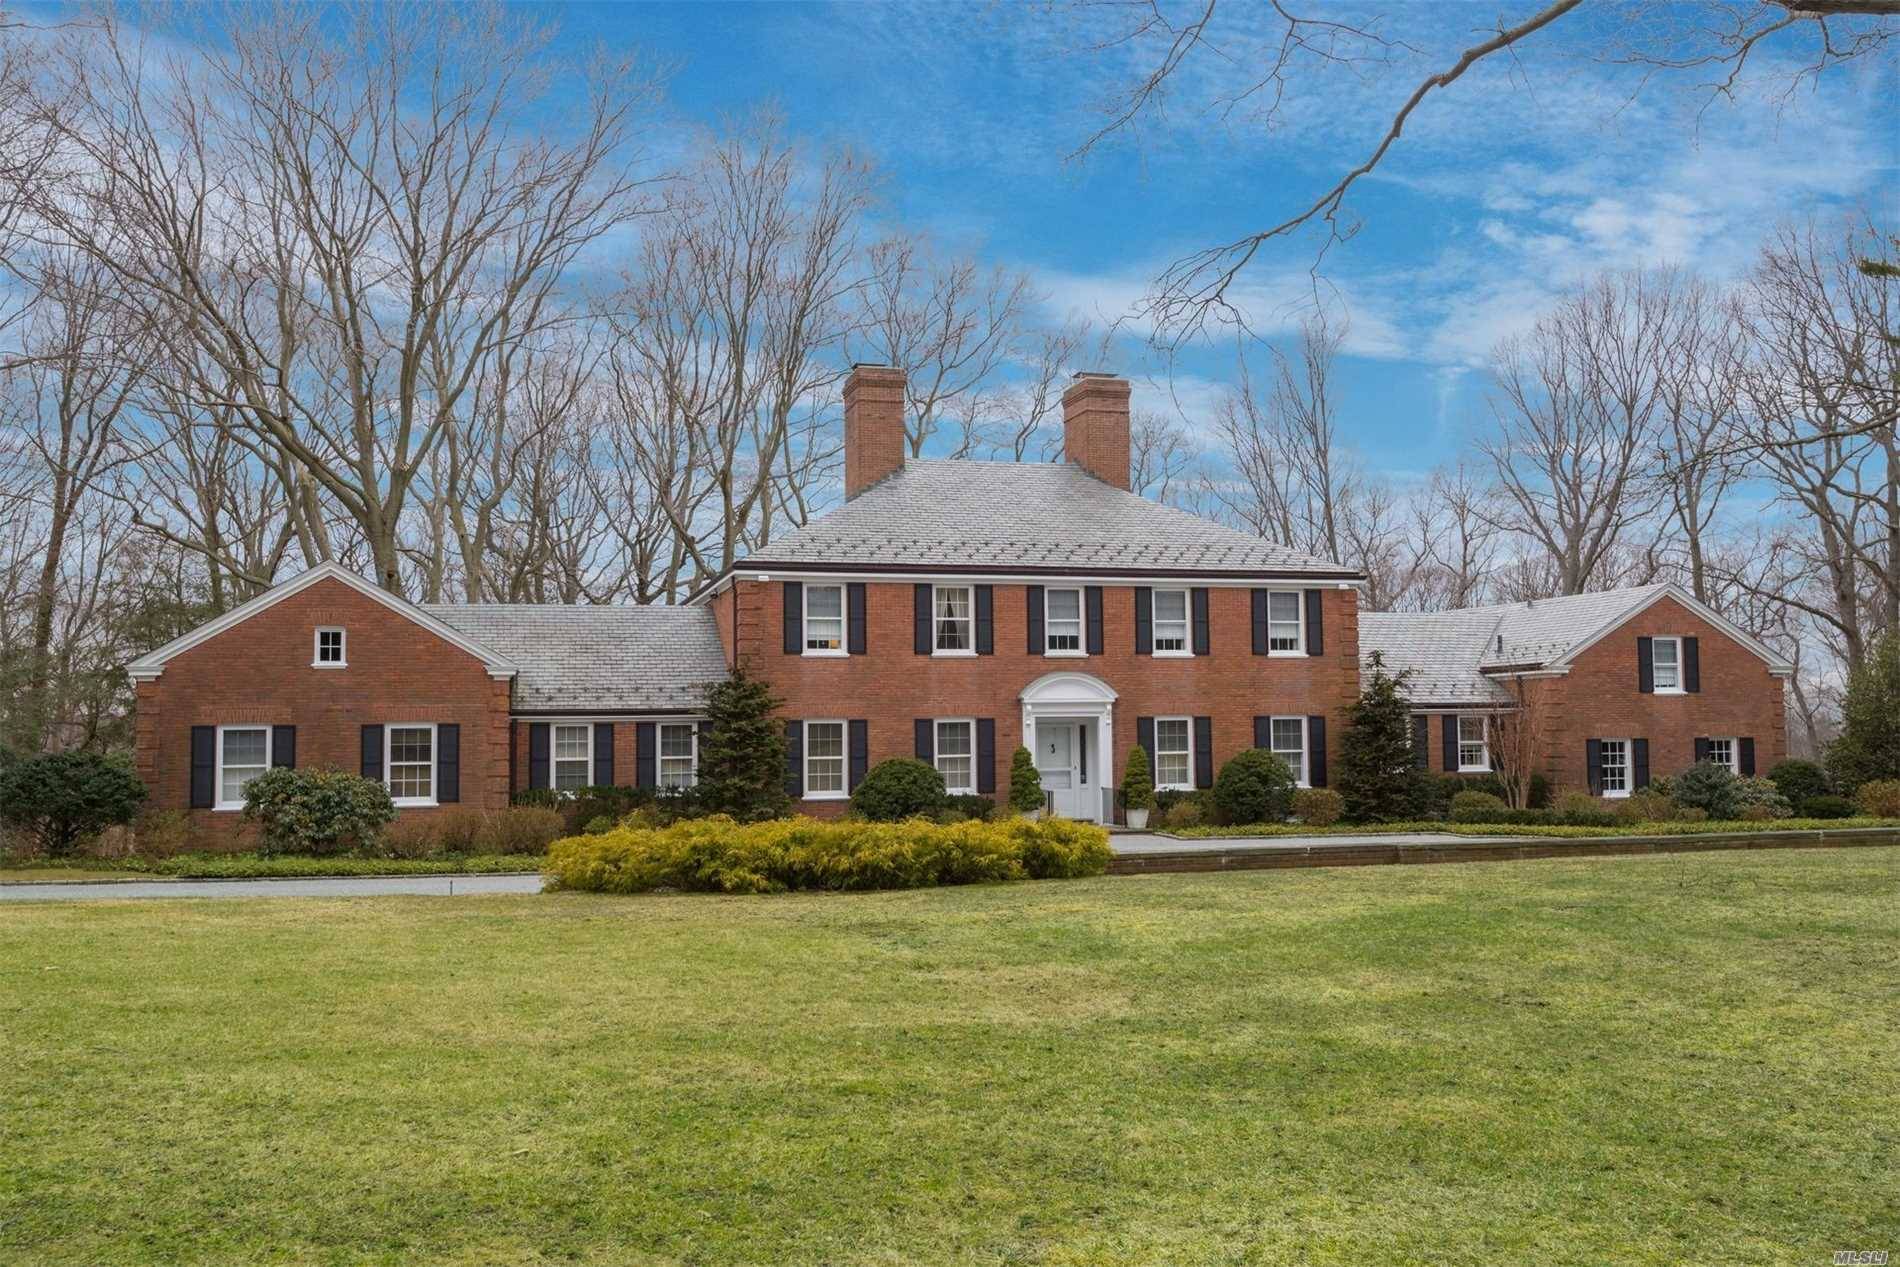 Traditional Custom Built 1968 Brick Manor Home Tucked Away On 5 Tranquil Mill Neck Acres With Pool.